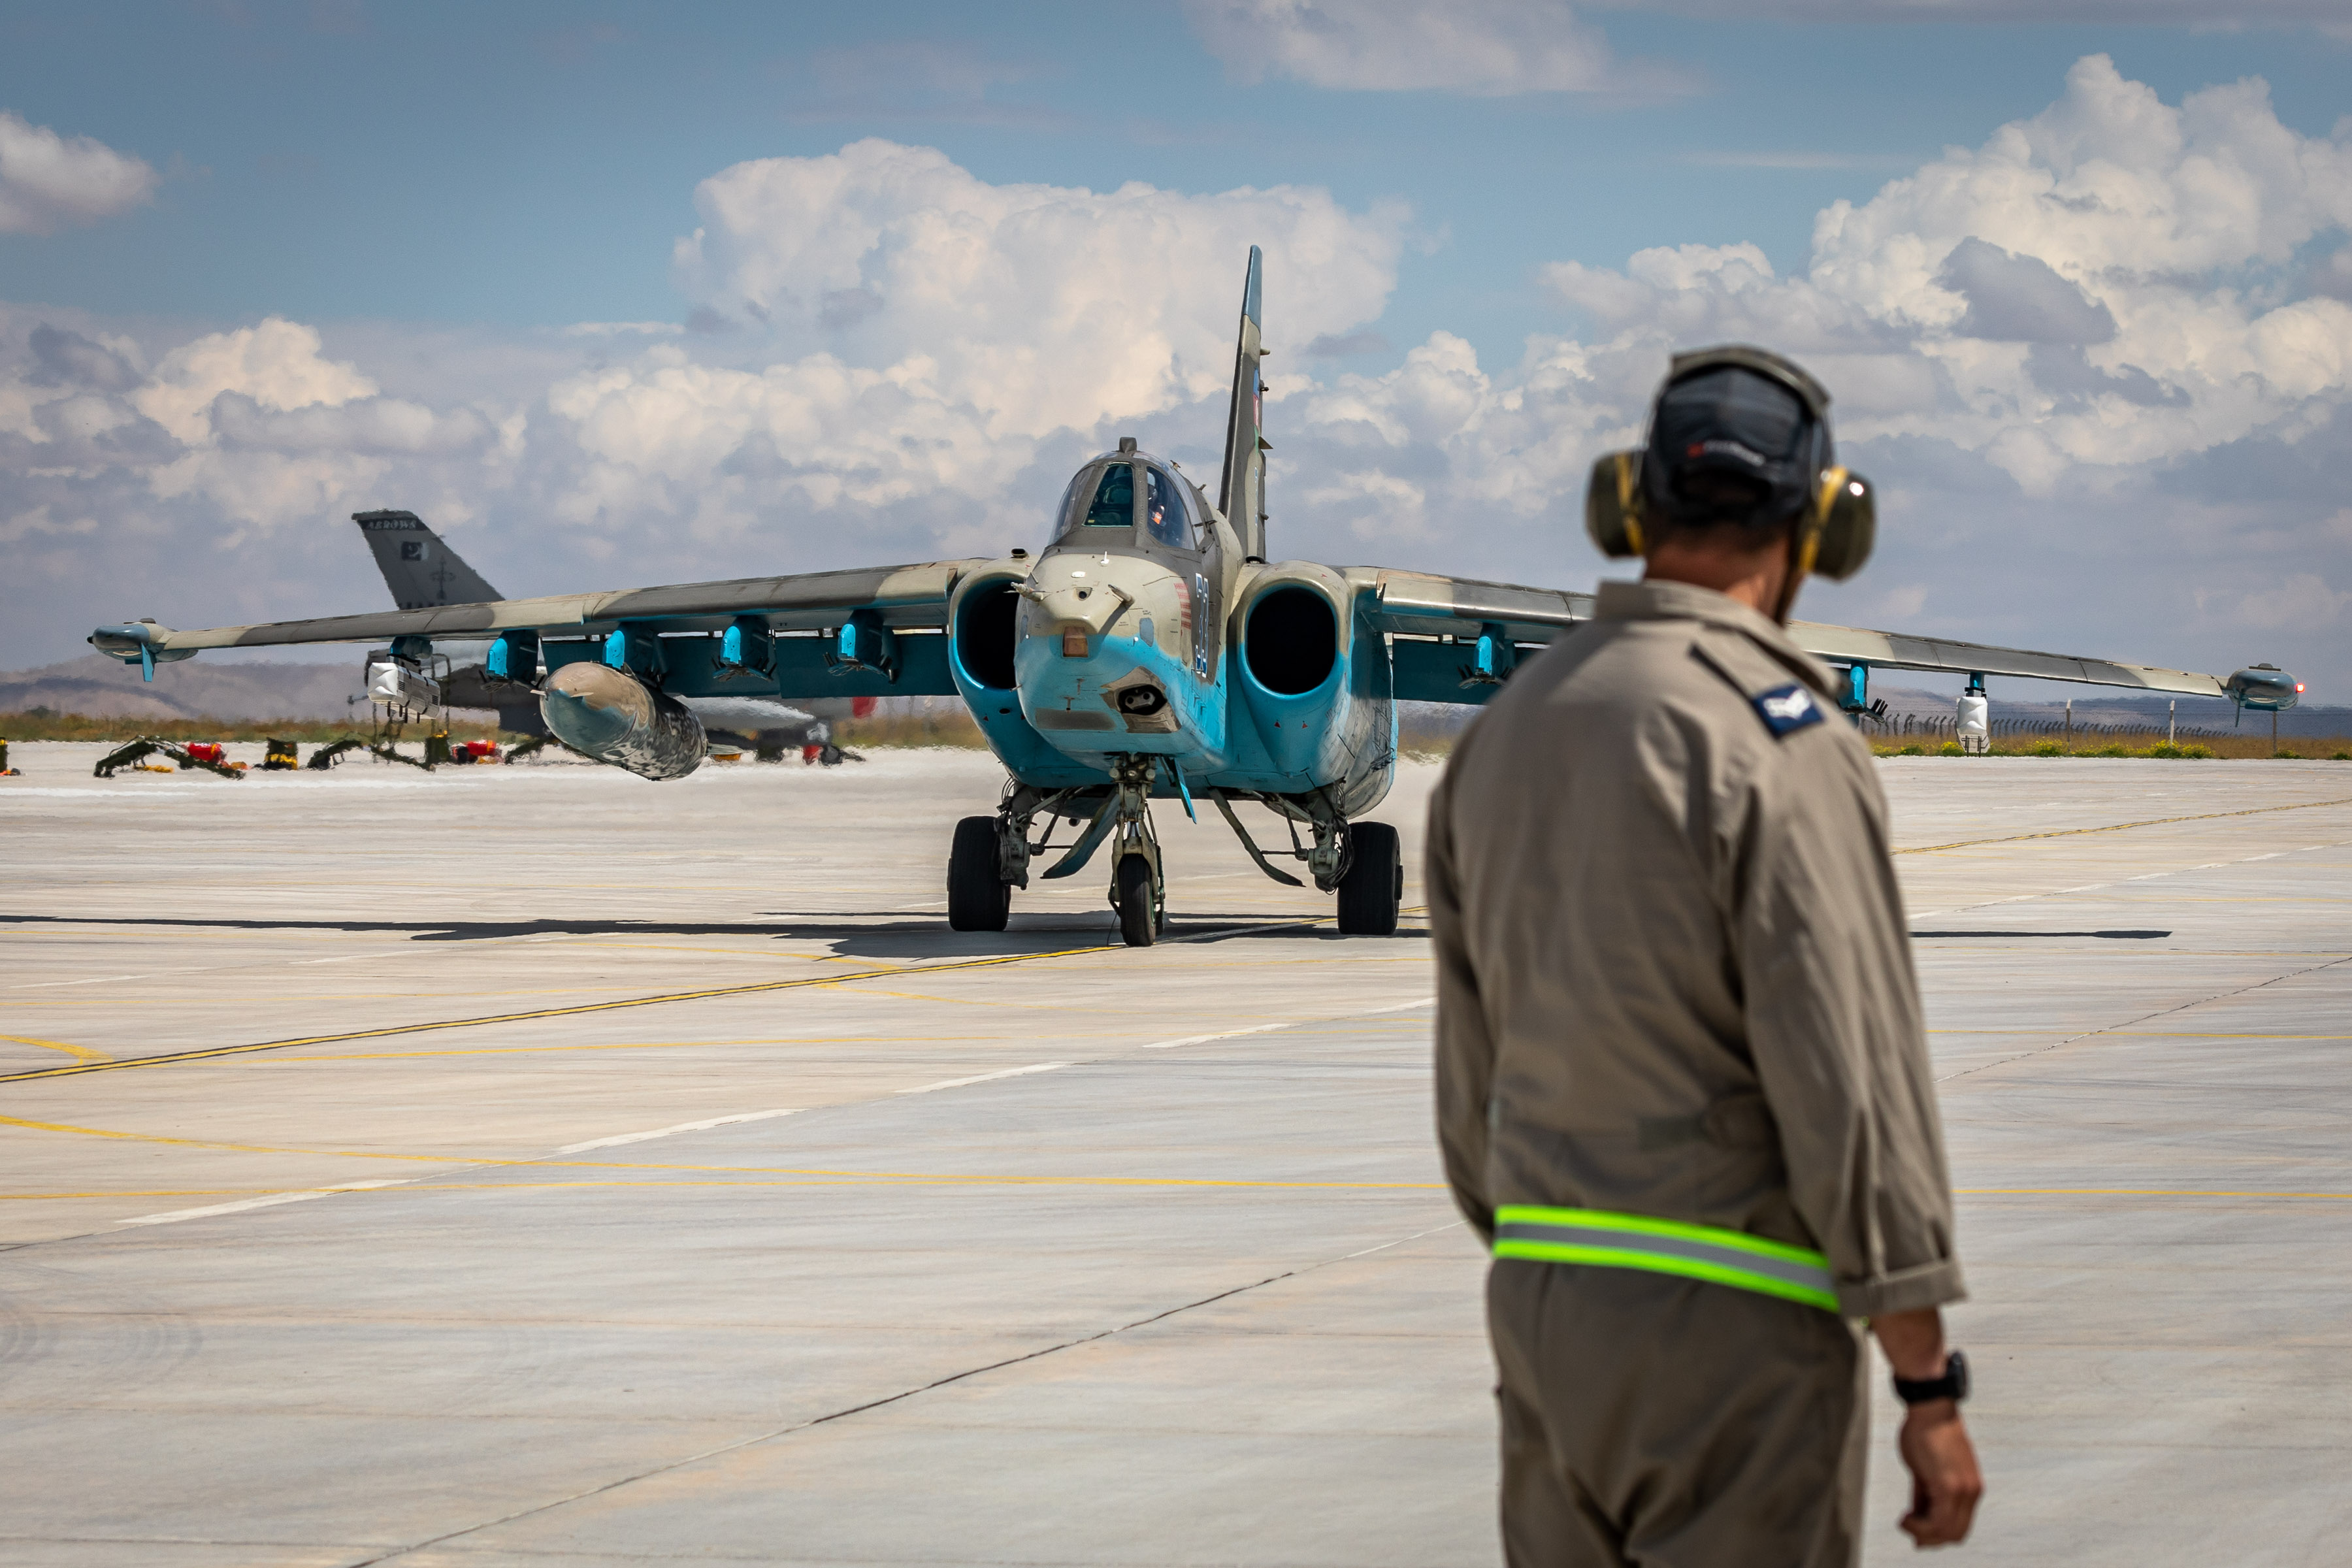 Image shows aviator looking towards Typhoon aircraft with blue painting on the airfield.